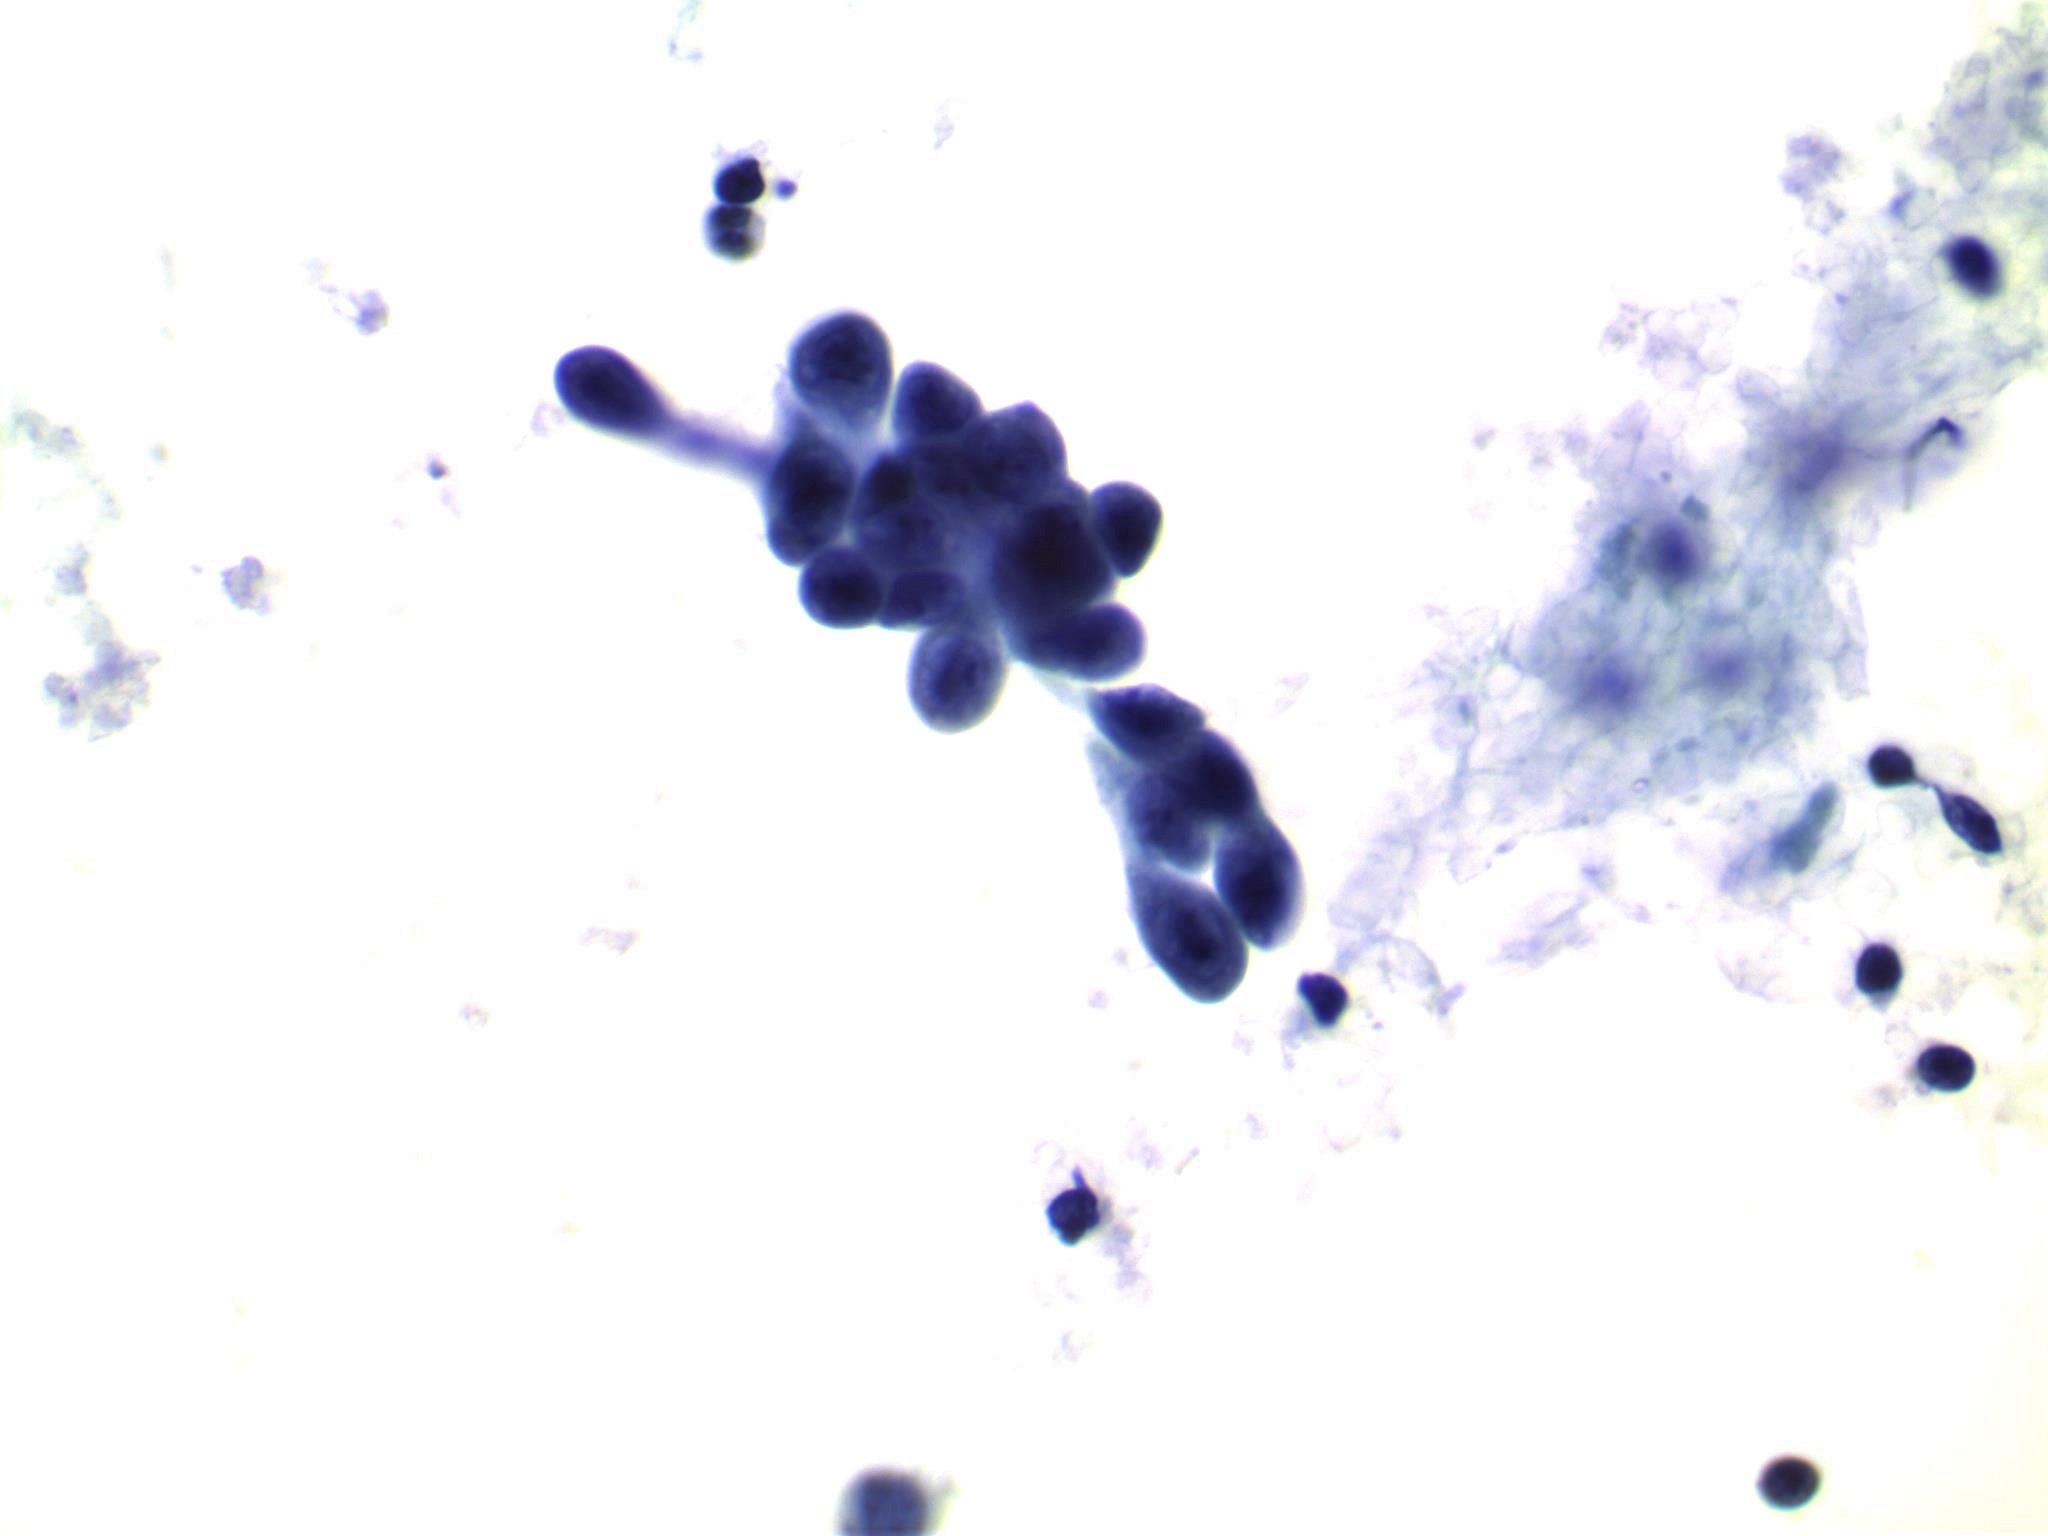 Cytological and architectural atypia